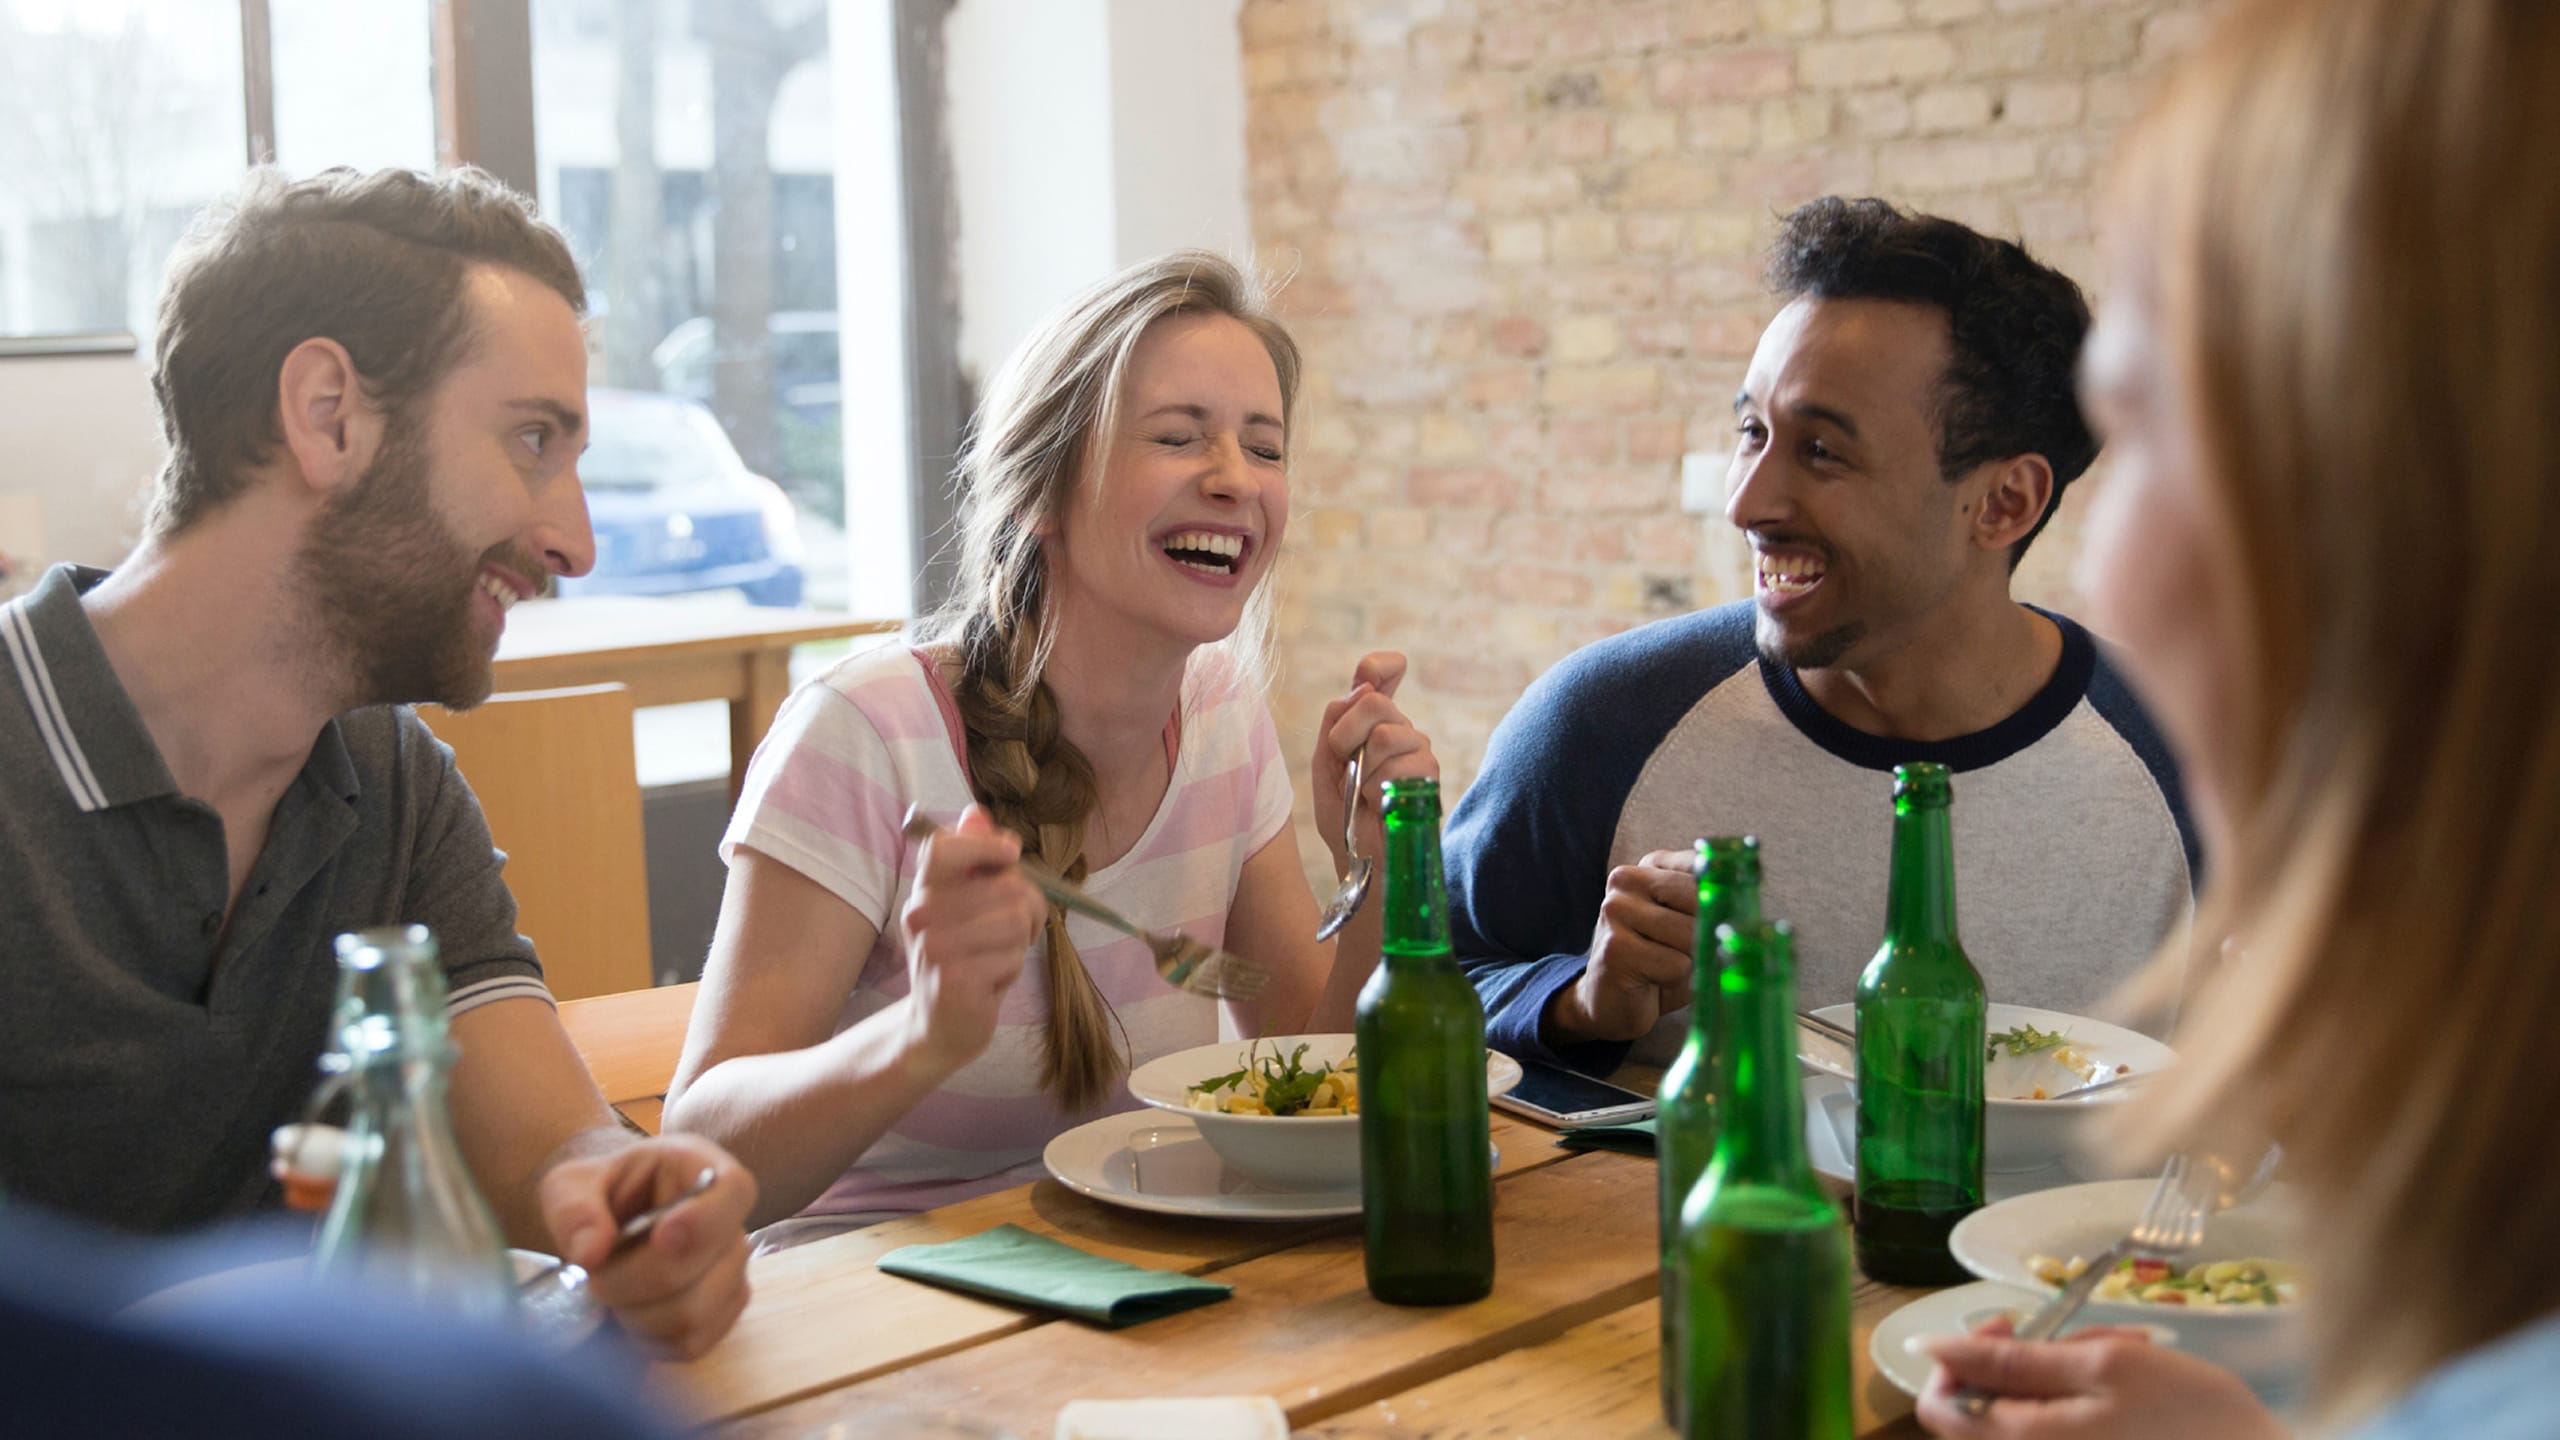 Leeds Building Society - Creating a welcoming society. Group of friends sat in a restaurant enjoing a meal together while laughing.